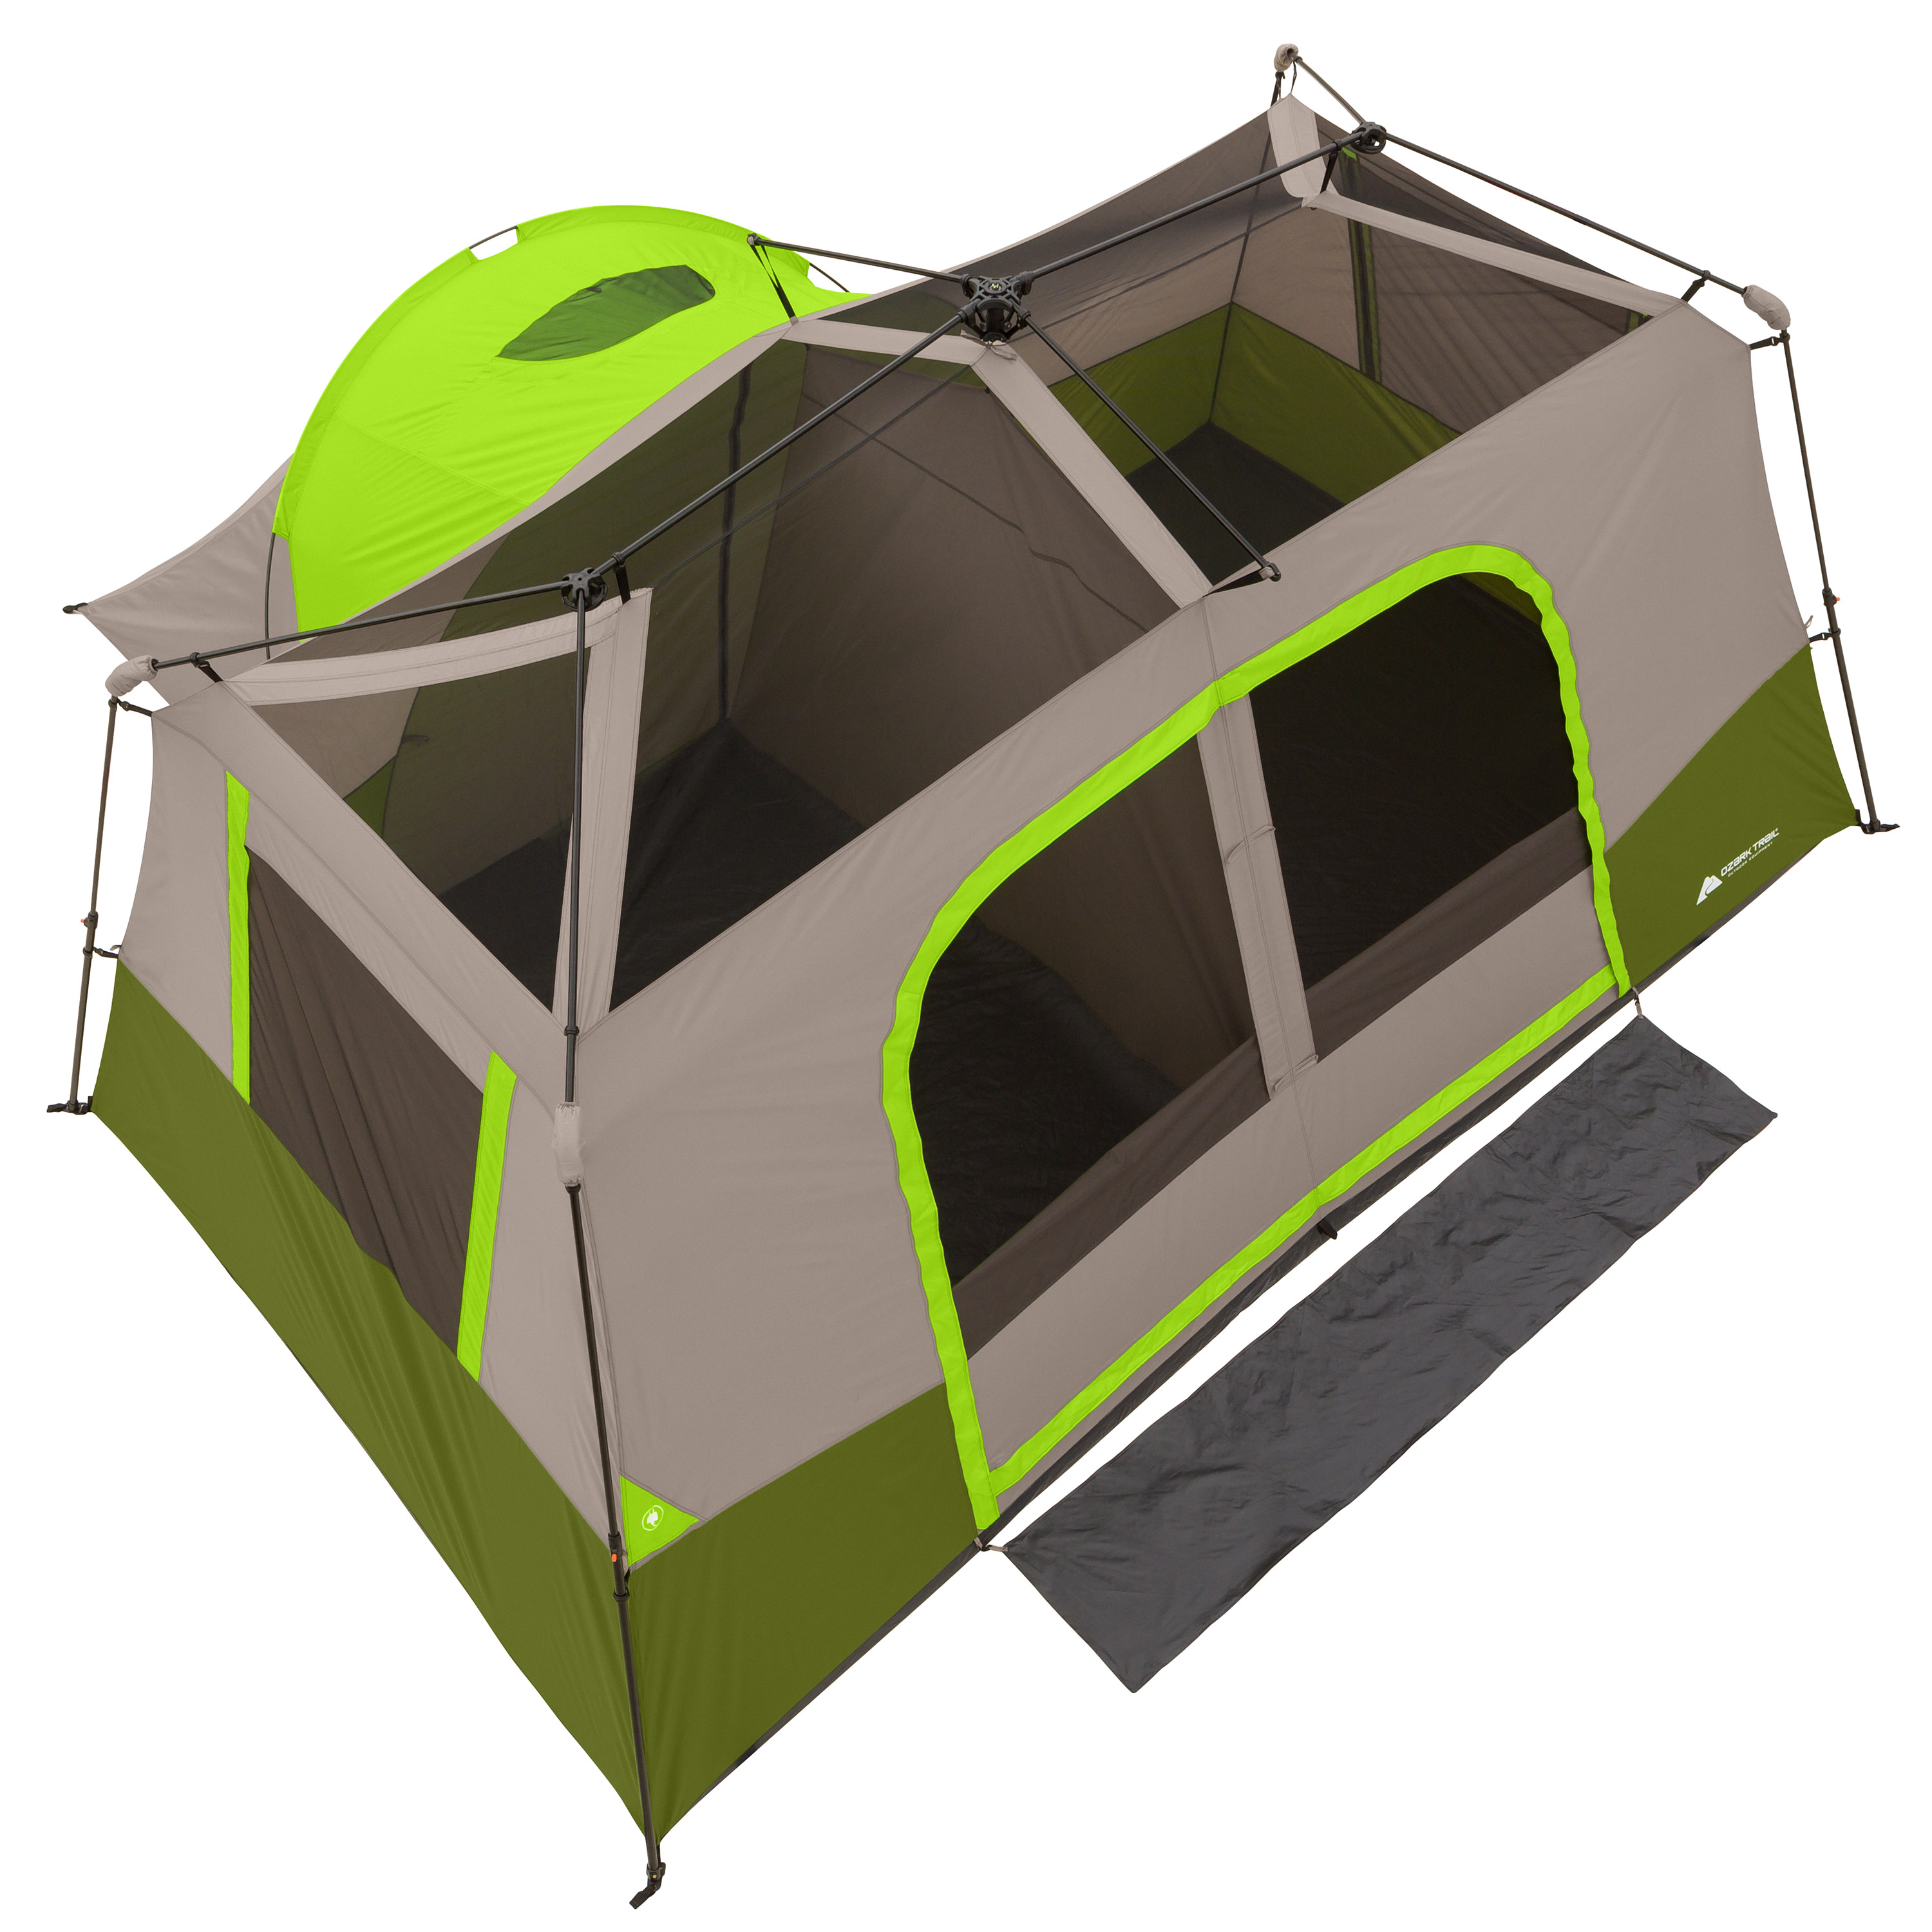 Ozark Trail 11-Person Instant Cabin Tent with Private Room - image 5 of 8